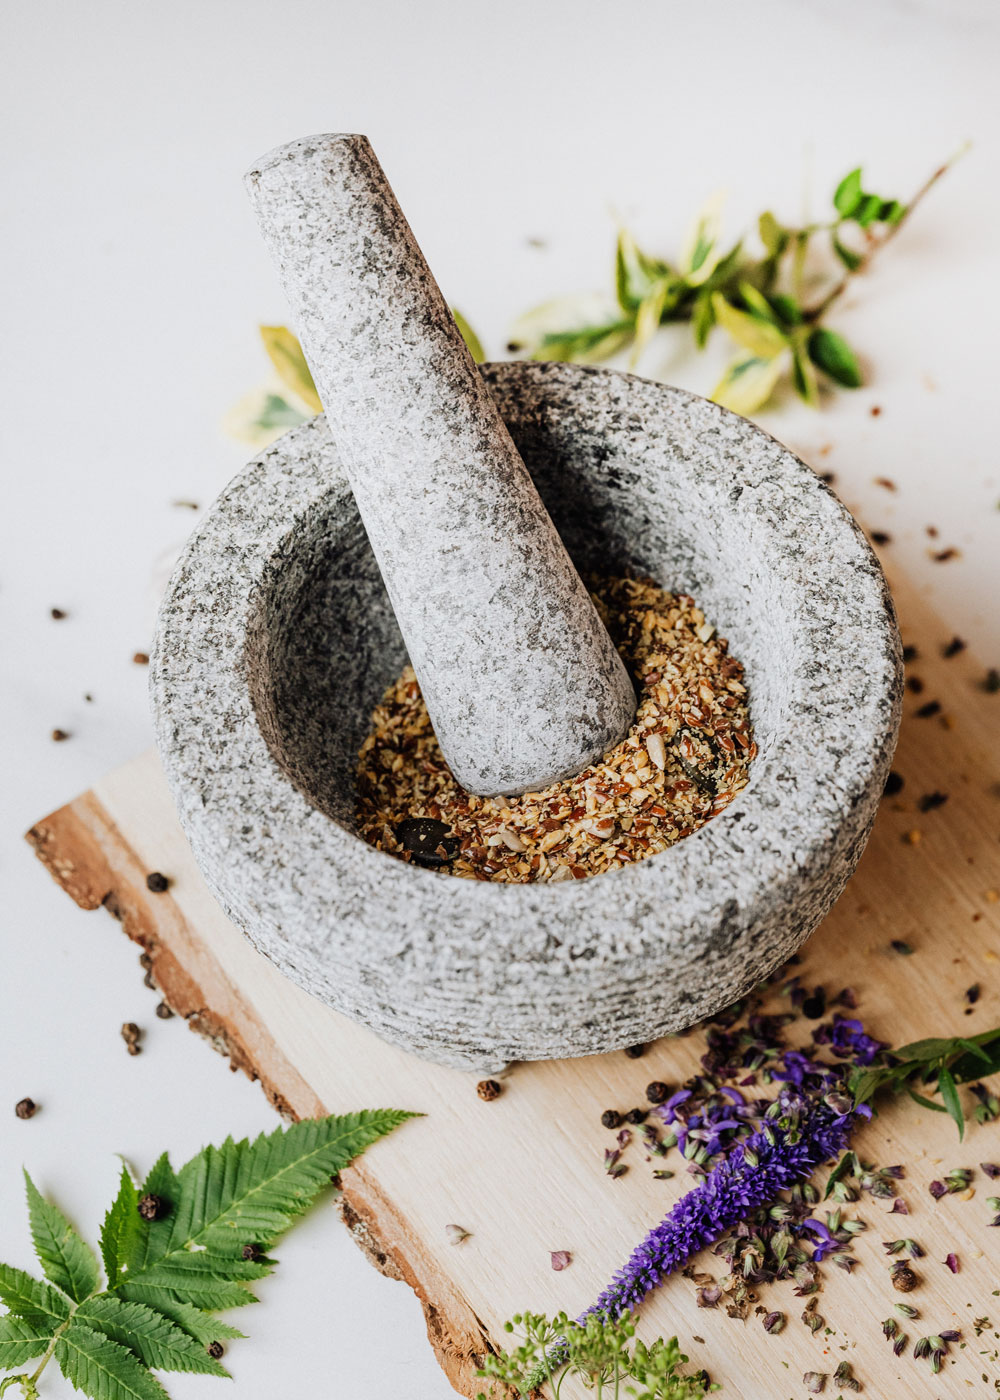 A stone mortar and pestle filled with seeds and surrounded by different edible plants and flowers